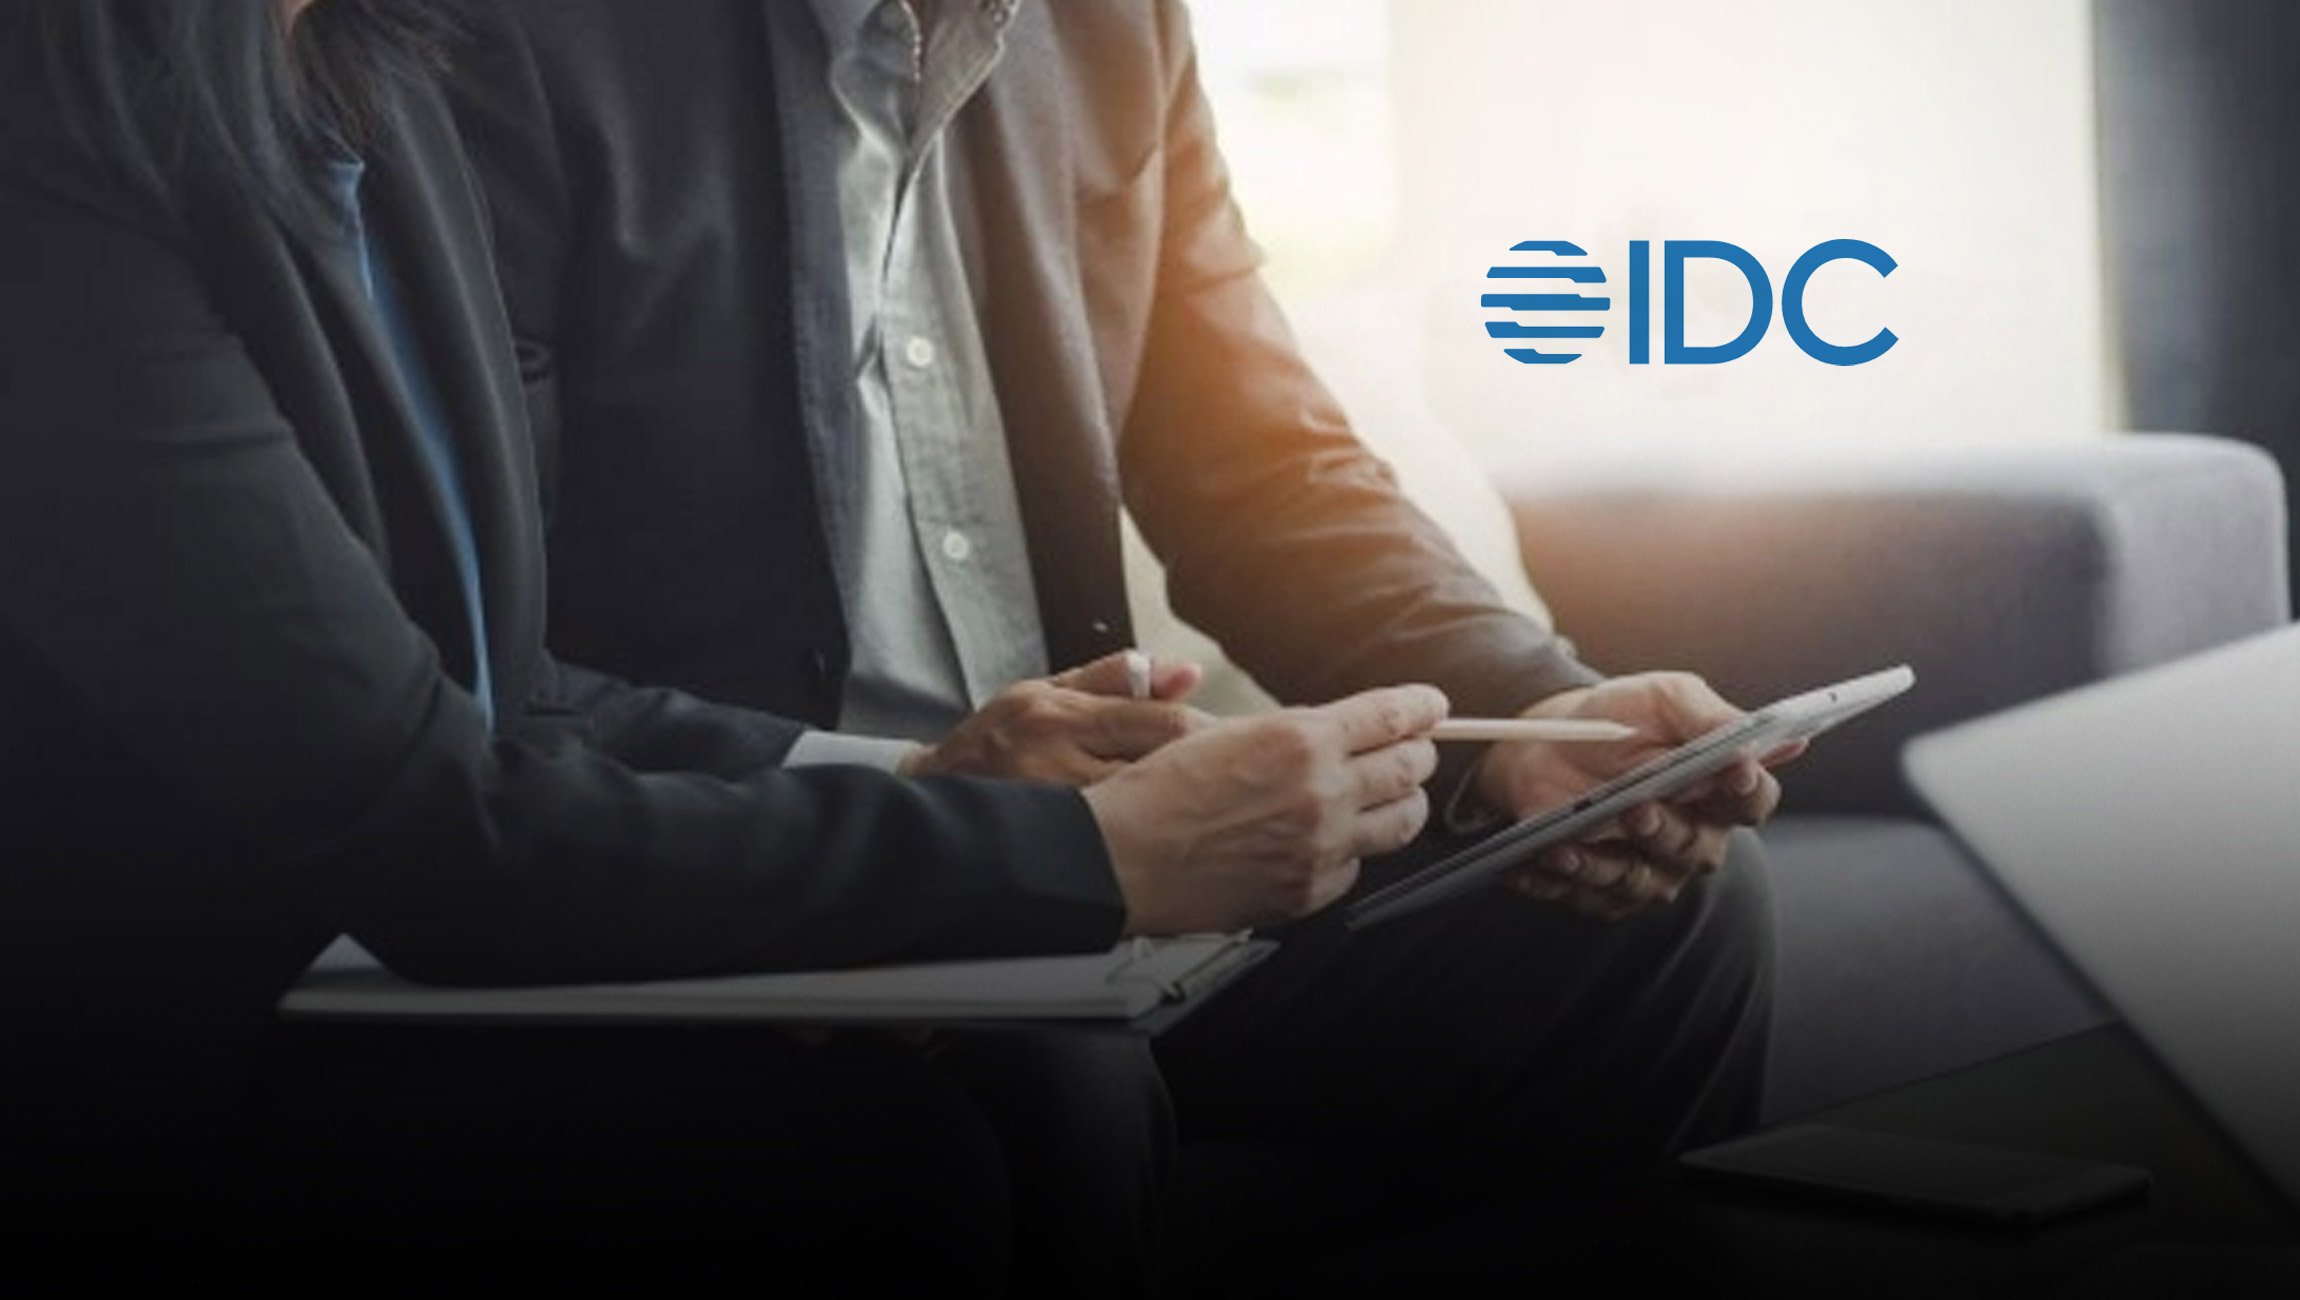 IT Product Revenue Grew 7.2% Through Top-Tier Distribution in North America in 2021, According to IDC's North America Weekly Distribution Tracker, powered by GTDC